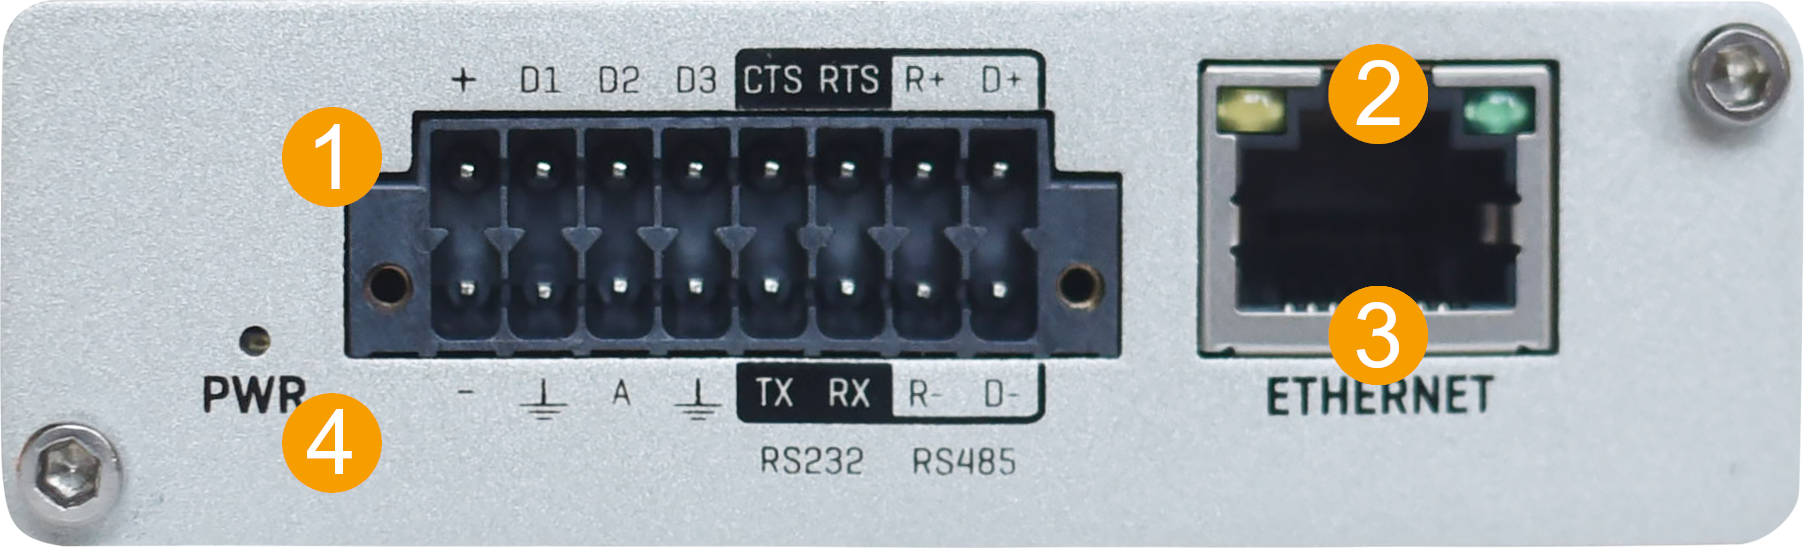 Networking trb2x5 manual trb2x5 front panel v2.png